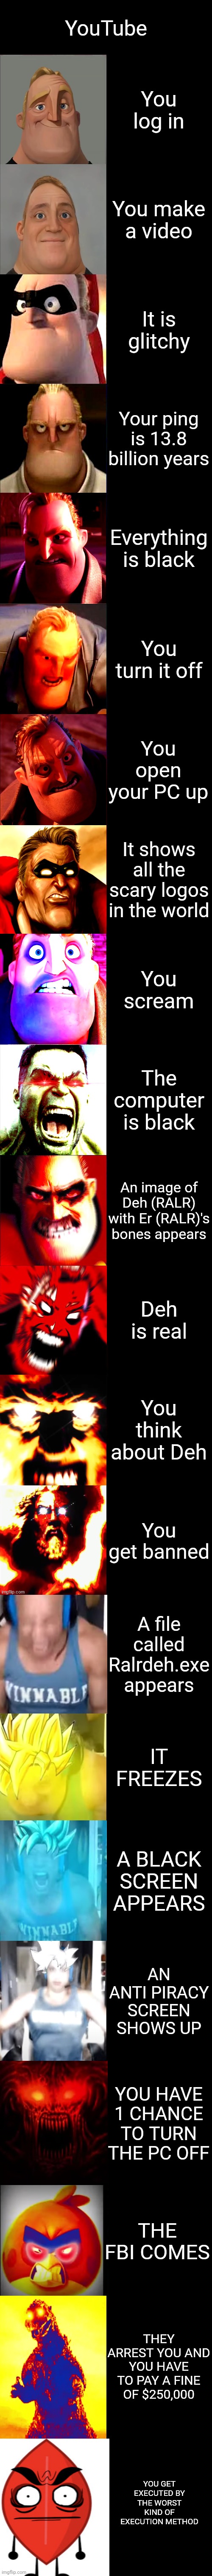 POV: You are on YT | YouTube; You log in; You make a video; It is glitchy; Your ping is 13.8 billion years; Everything is black; You turn it off; You open your PC up; It shows all the scary logos in the world; You scream; The computer is black; An image of Deh (RALR) with Er (RALR)'s bones appears; Deh is real; You think about Deh; You get banned; A file called Ralrdeh.exe appears; IT FREEZES; A BLACK SCREEN APPEARS; AN ANTI PIRACY SCREEN SHOWS UP; YOU HAVE 1 CHANCE TO TURN THE PC OFF; THE FBI COMES; THEY ARREST YOU AND YOU HAVE TO PAY A FINE OF $250,000; YOU GET EXECUTED BY THE WORST KIND OF EXECUTION METHOD | image tagged in mr incredible becoming angry 21 phases | made w/ Imgflip meme maker